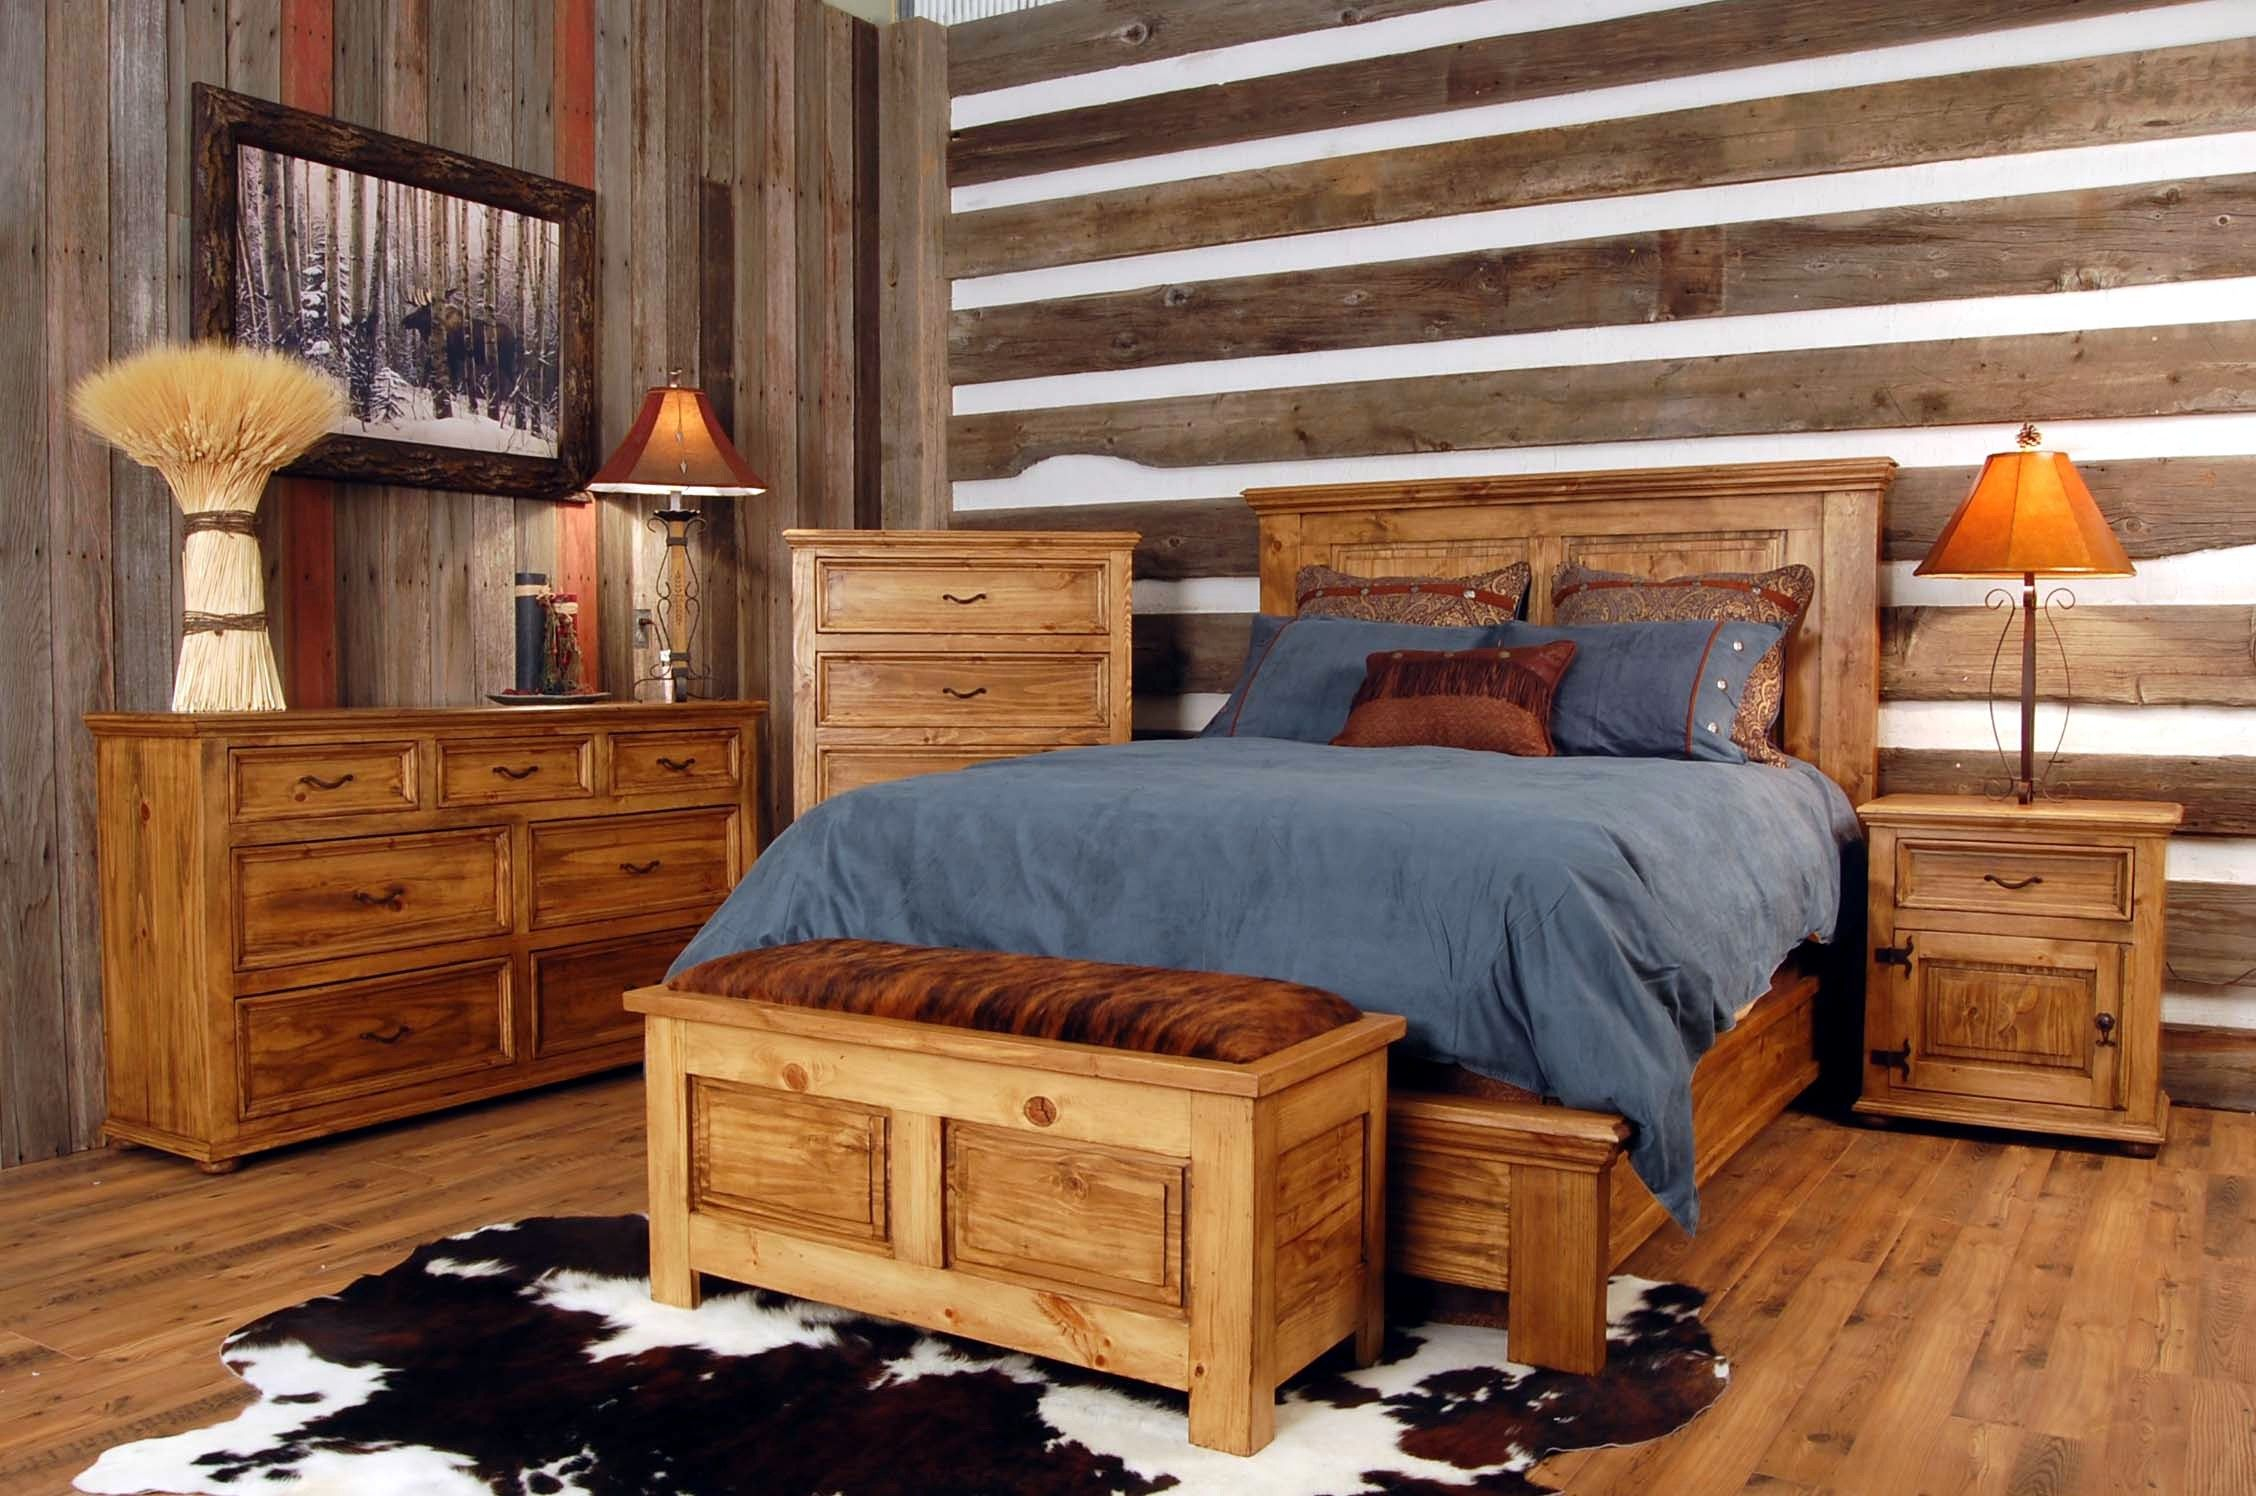 Exquisite Log Cabin House Interior Bedroom Ideas With Rustic with regard to measurements 2256 X 1496